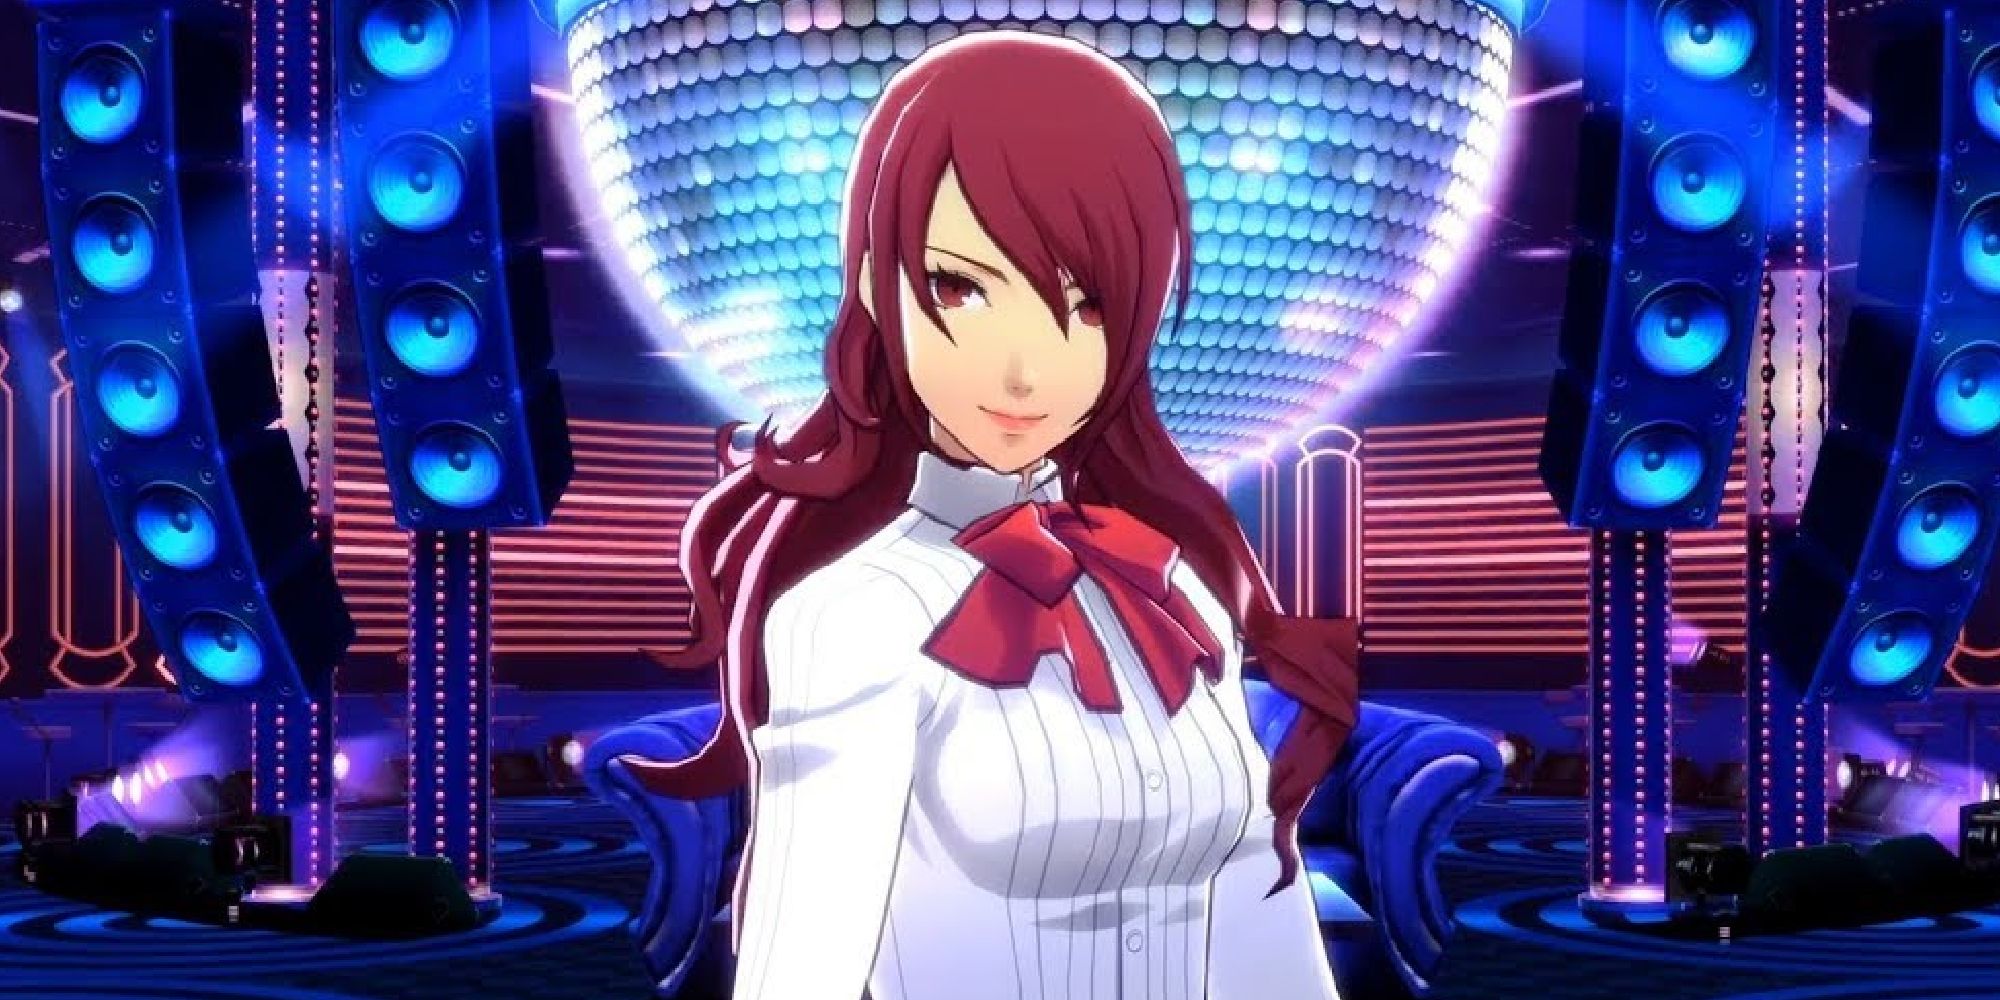 Mitsuru facing the player while standing in a music club